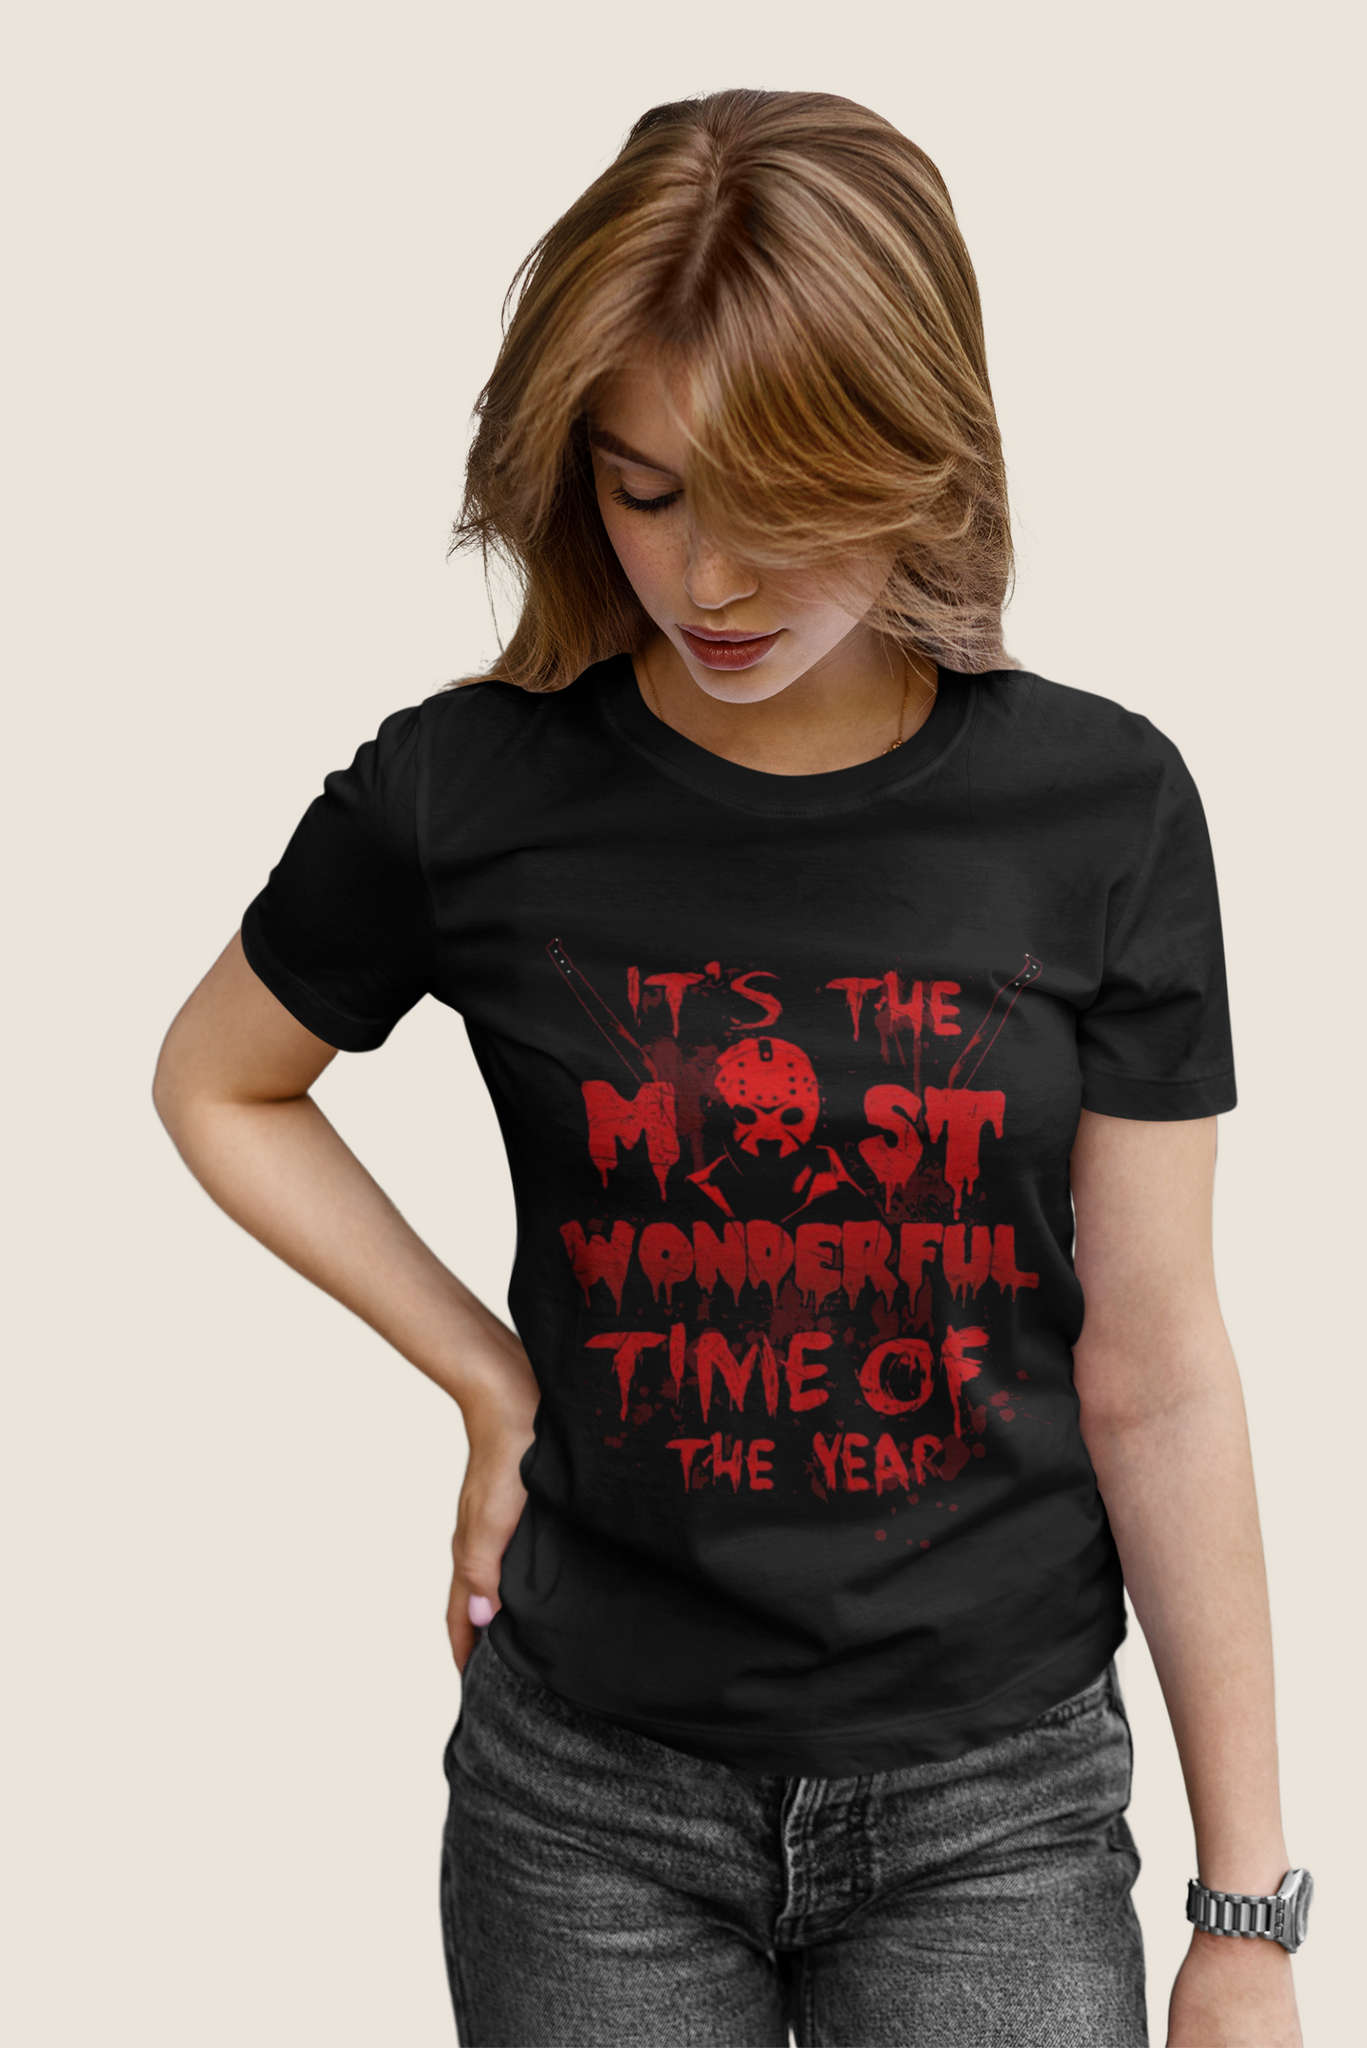 Friday 13th T Shirt, Jason Voorhees Shirt, Its The Most Wonderful Time Of The Year T Shirt, Halloween Gifts